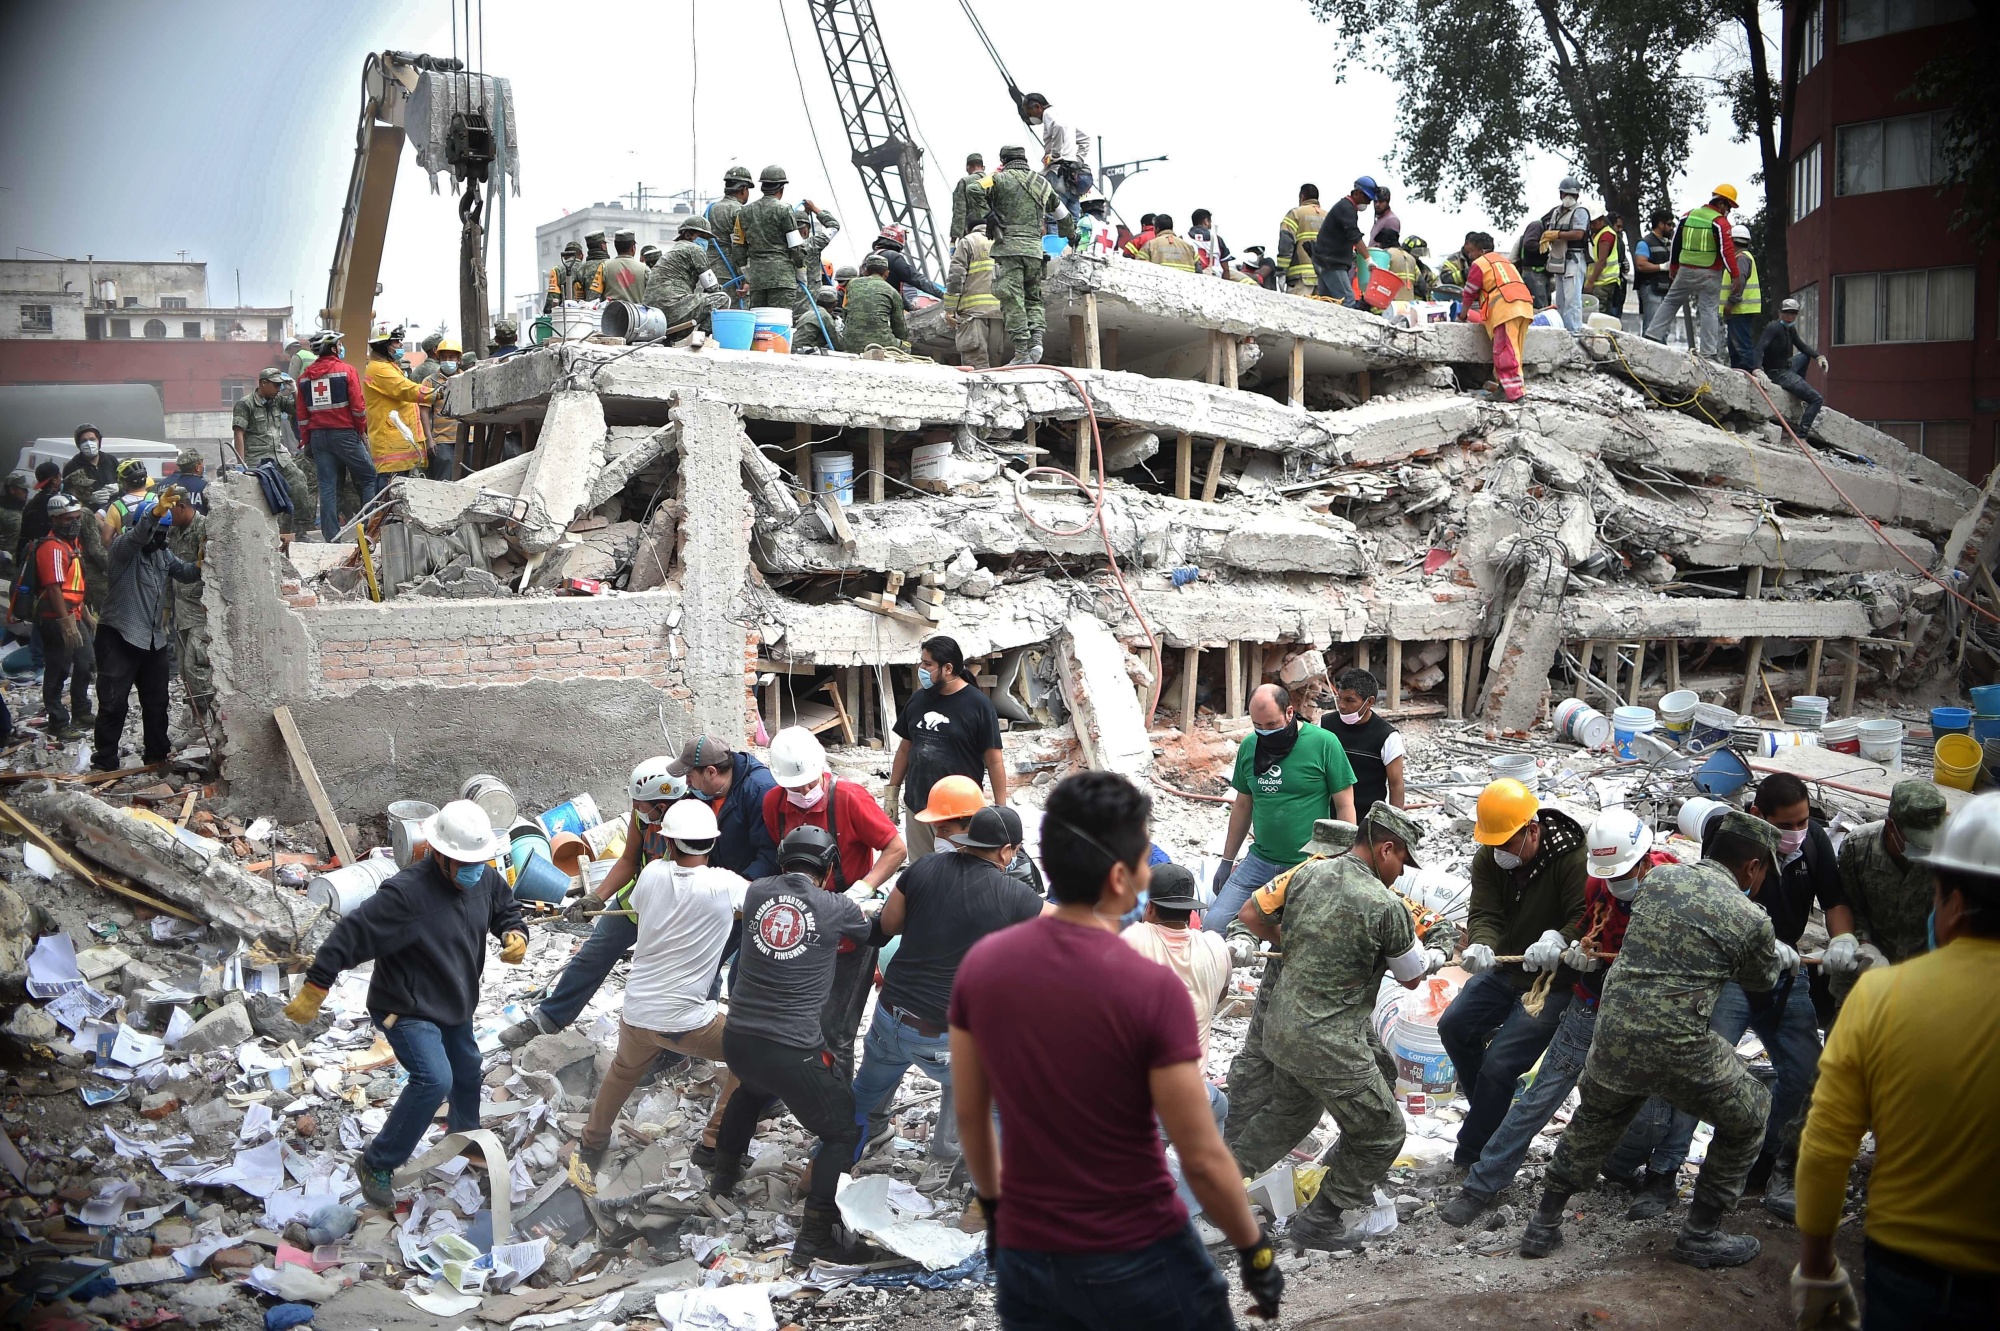 Rescuers search for survivors in a flattened building in Mexico City following the earthquake in 2017.